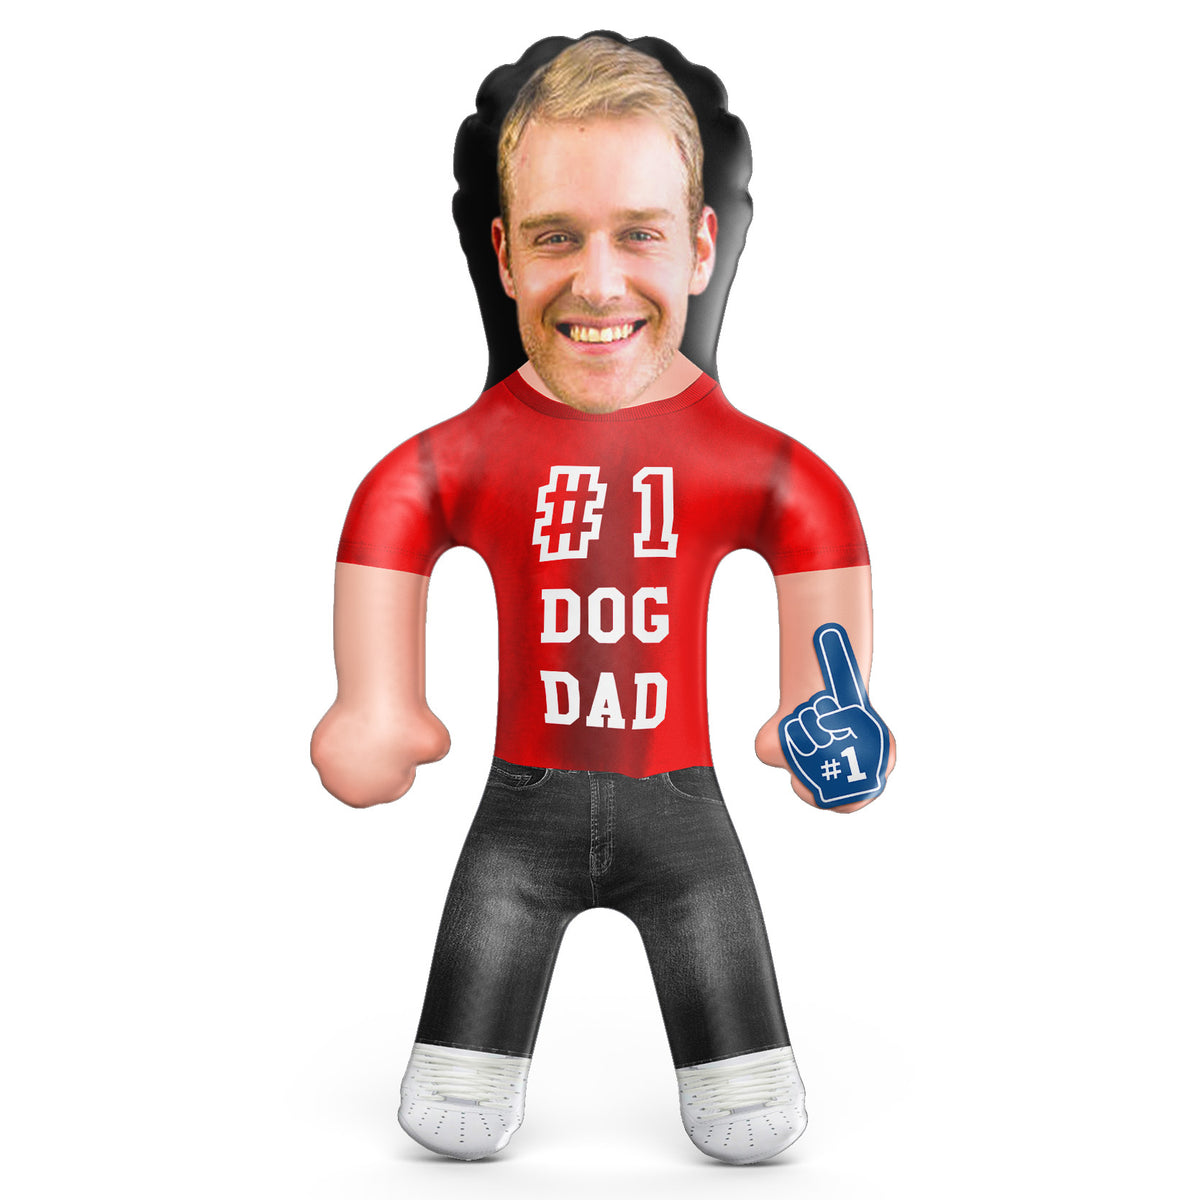 Dog Dad Inflatable Doll - Custom Blow Up Doll